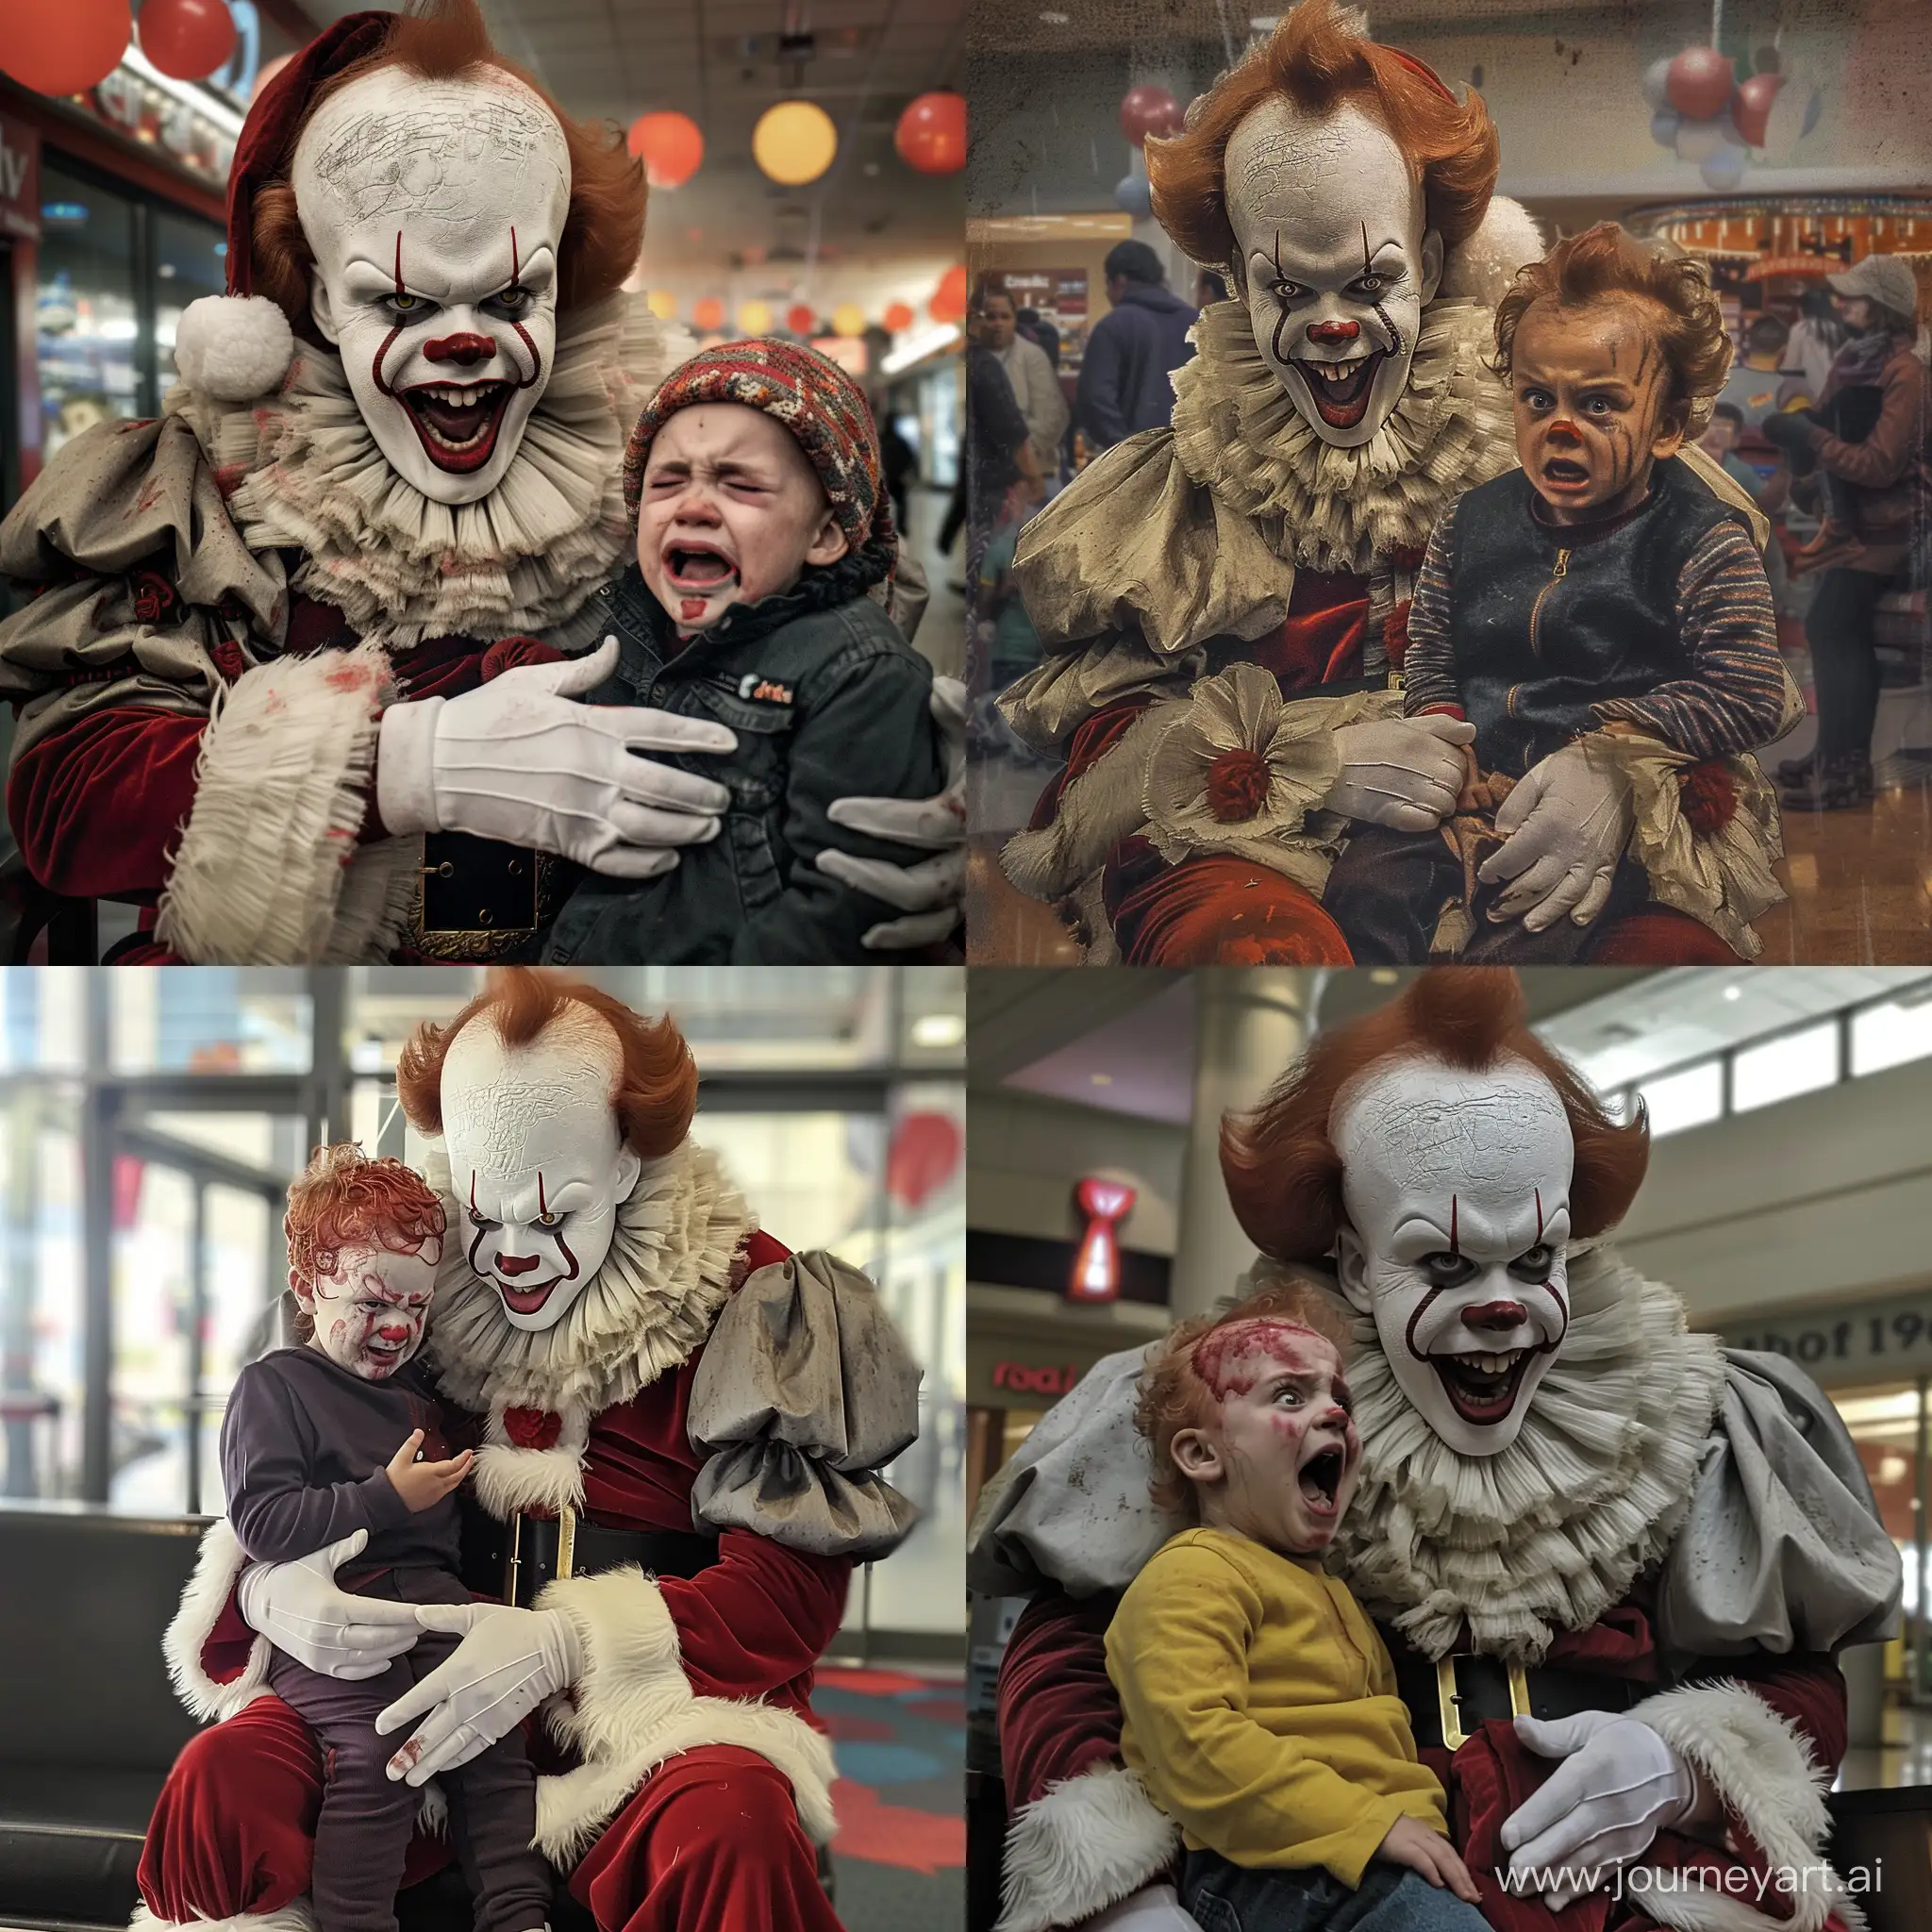 Pennywise as a mall Santa. With a child on his lap who is crying uncontrollably.